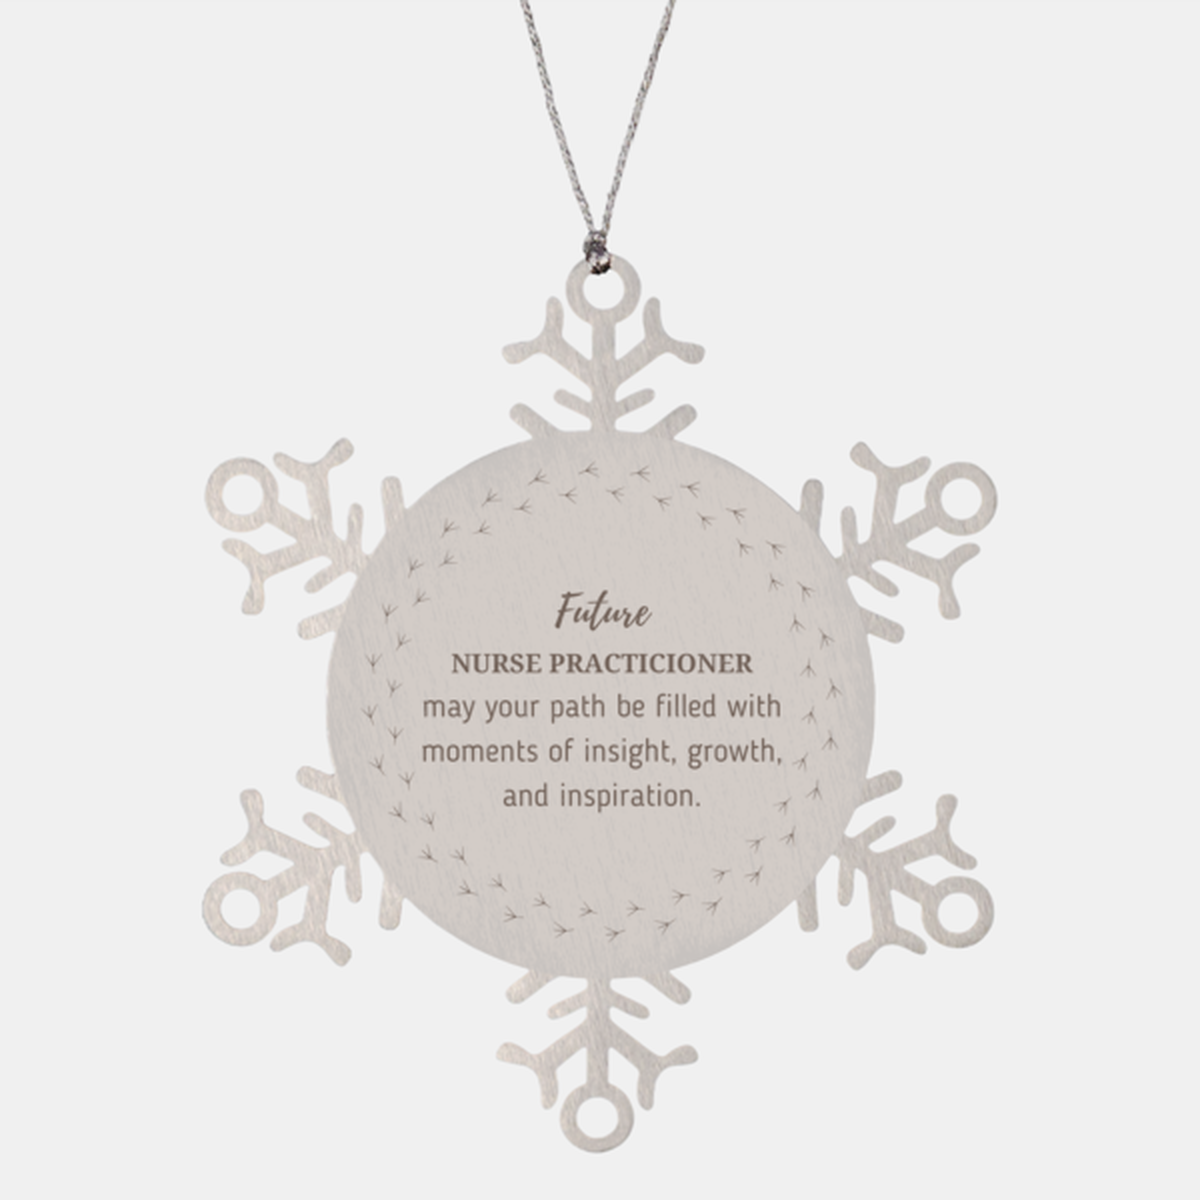 Future Nurse Practicioner Gifts, May your path be filled with moments of insight, Graduation Gifts for New Nurse Practicioner, Christmas Unique Snowflake Ornament For Men, Women, Friends